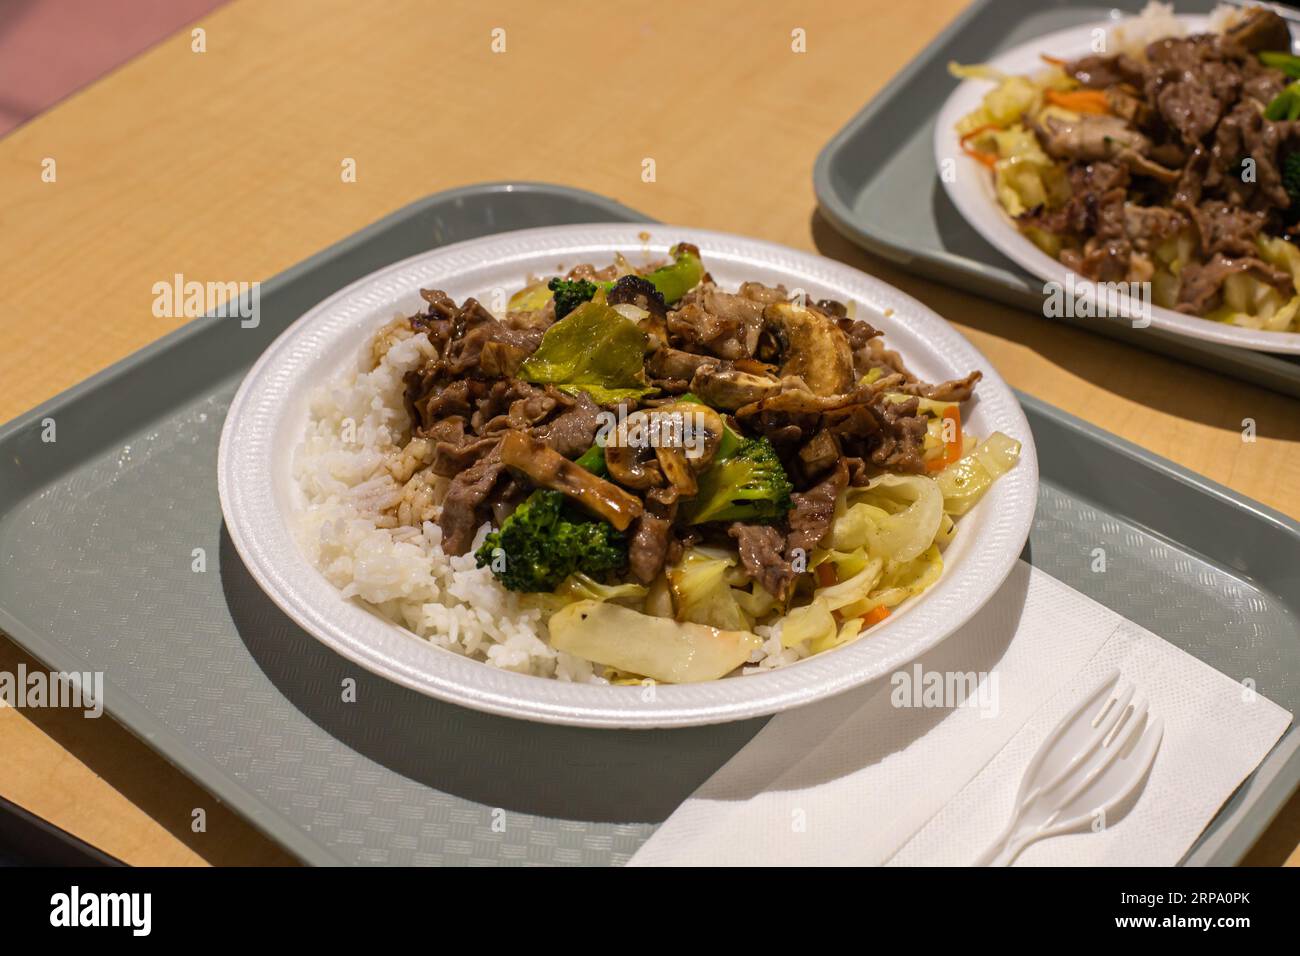 Teriyaki beef and stir-fried vegetables with rice. The dish is at a table in the food court. Stock Photo